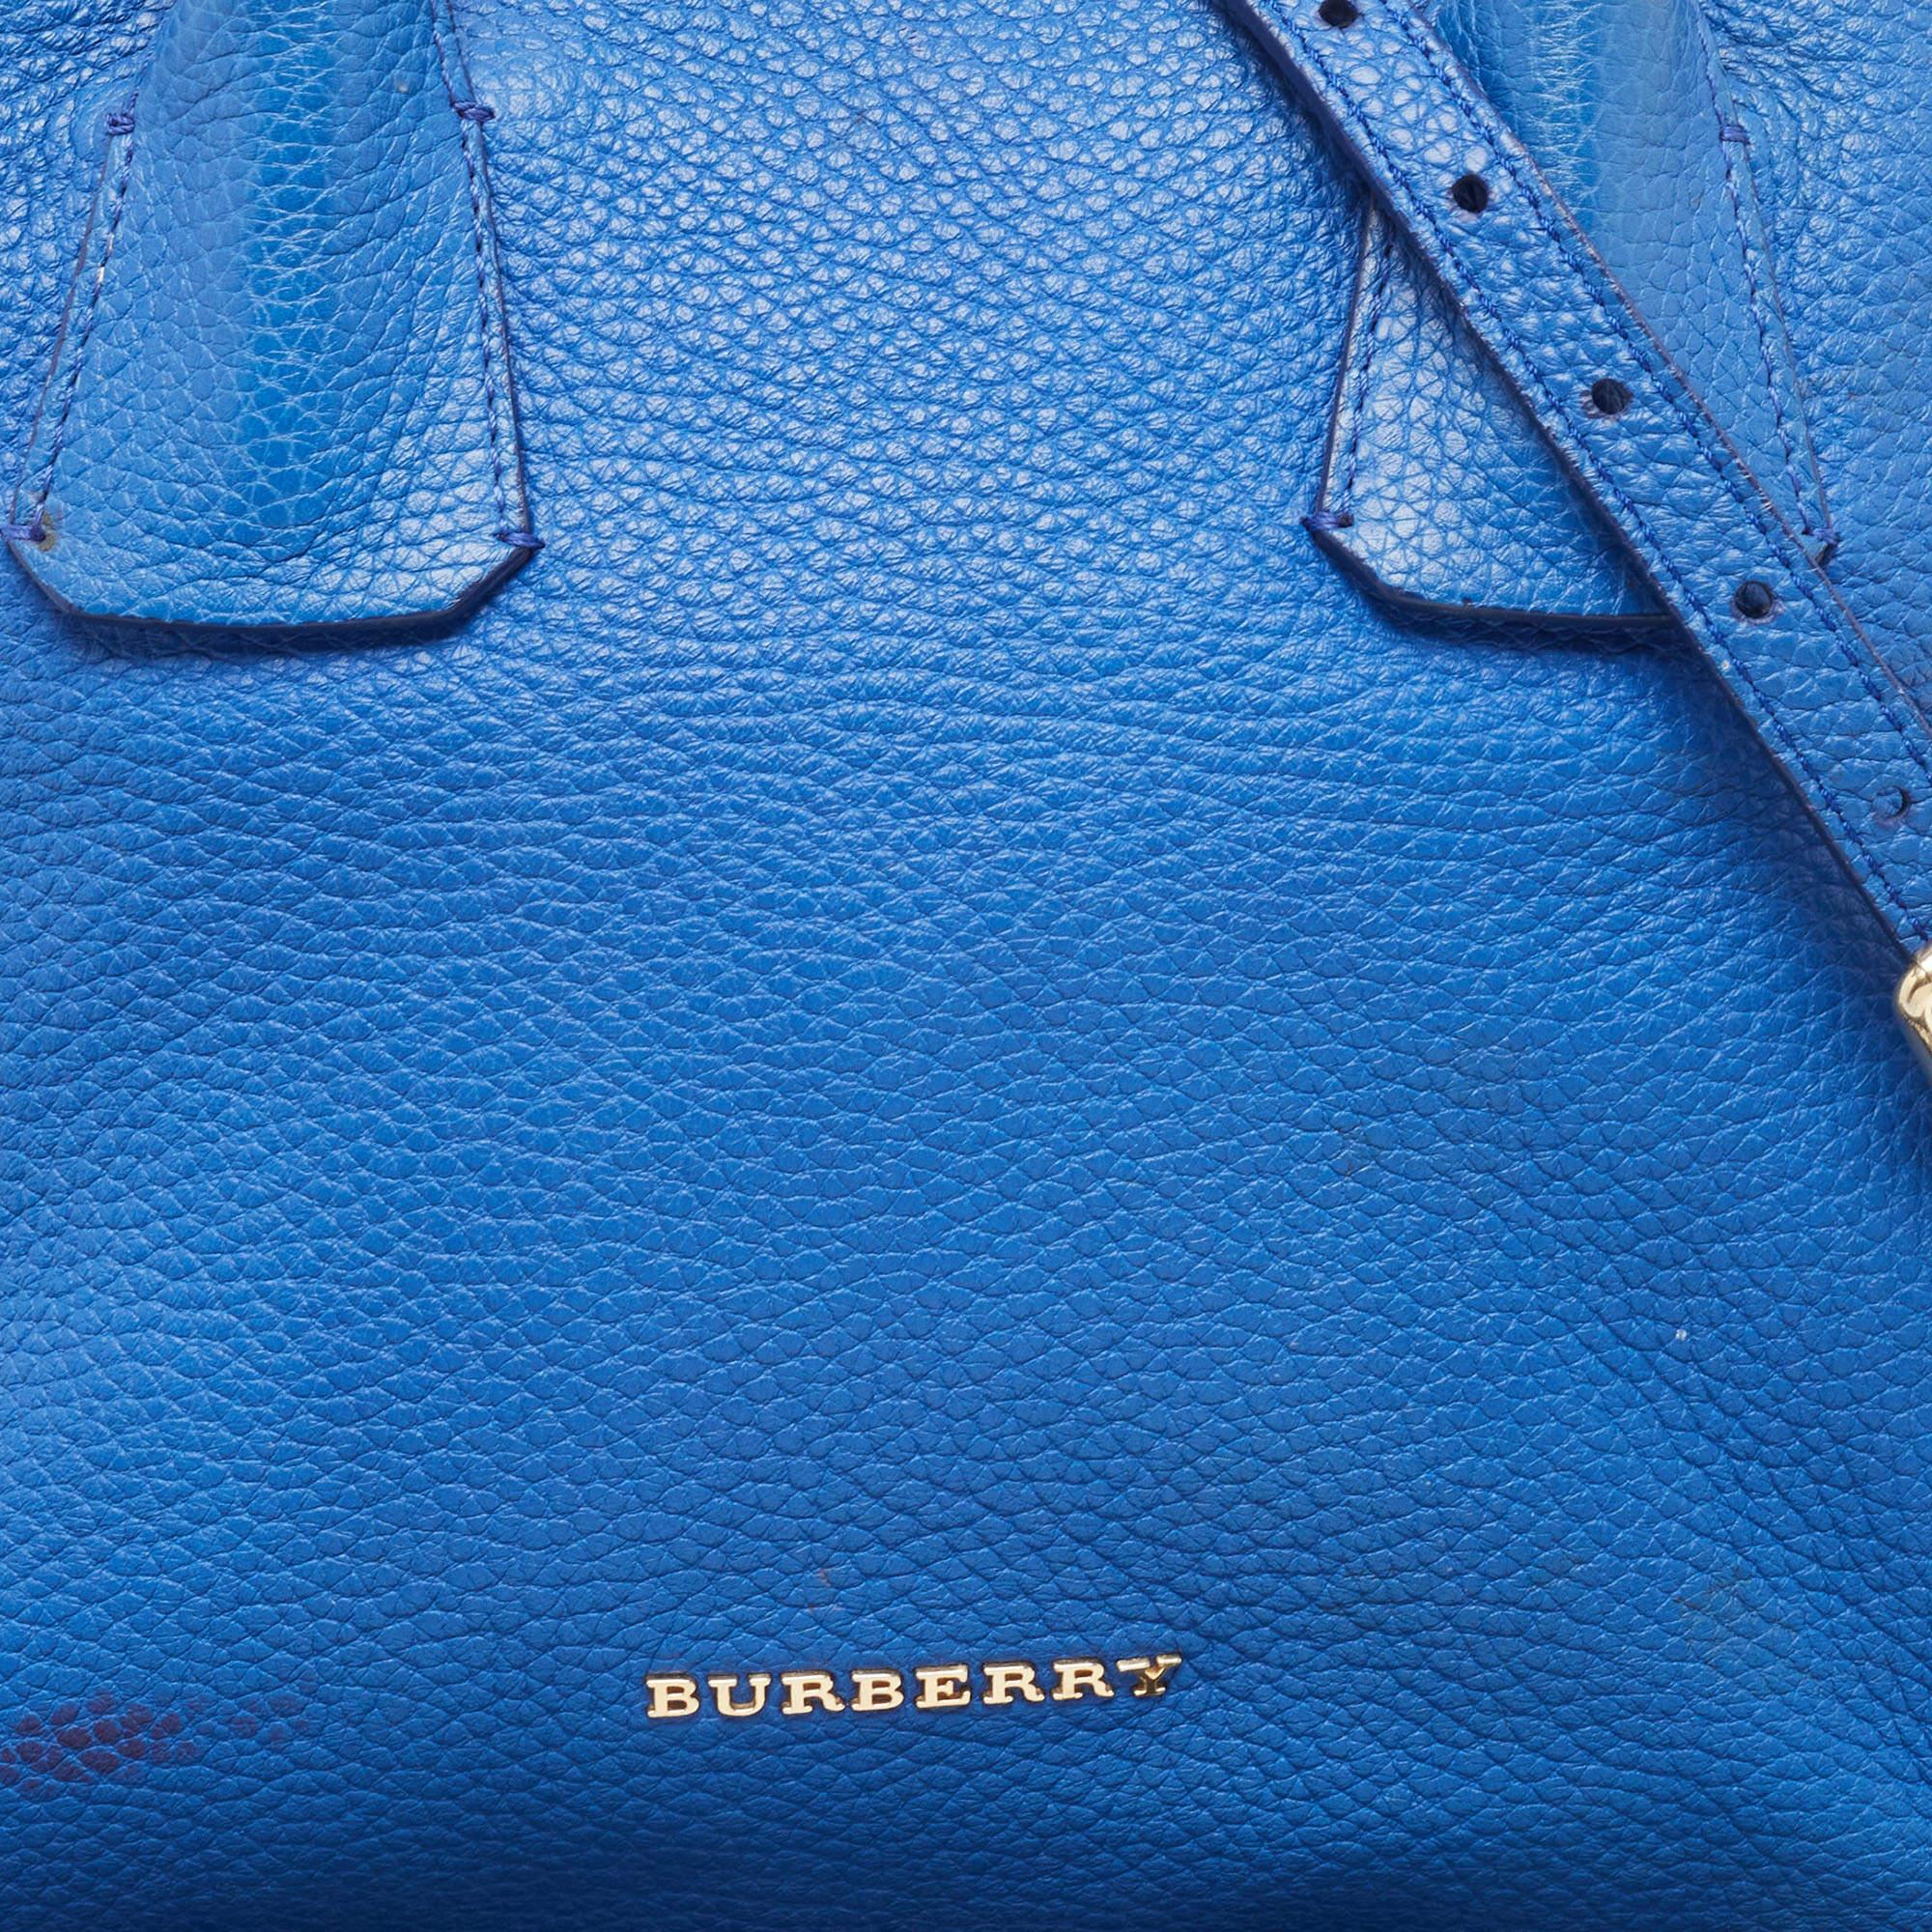 Burberry Blue Pebbled Leather Yorke Satchel For Sale 6